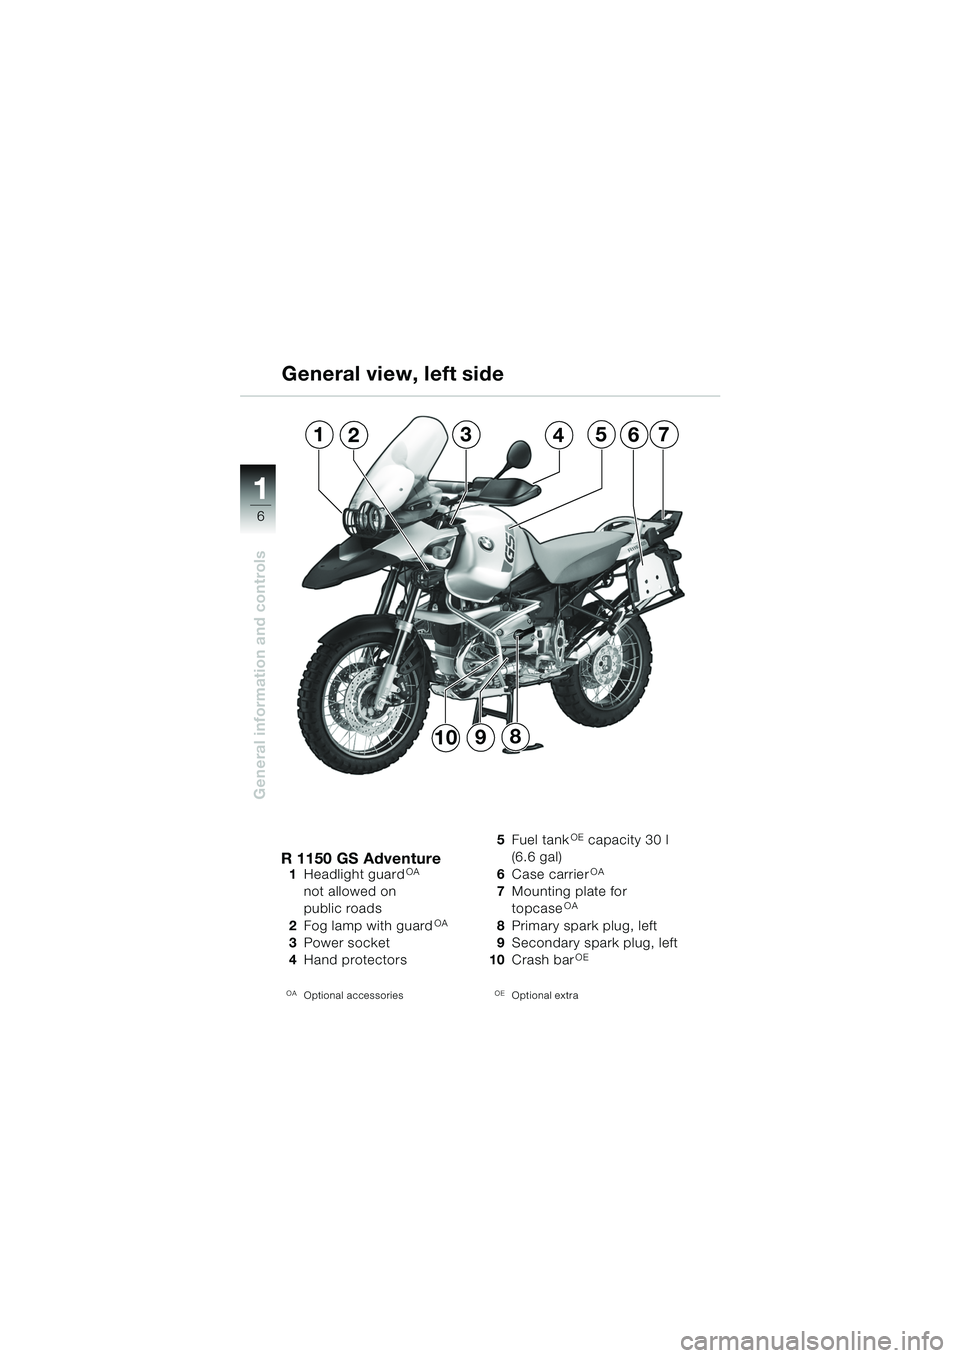 BMW MOTORRAD R 1150 GS 2002  Riders Manual (in English) 11
6
General information and controls
1235764
8910
R 1150 GS Adventure1 Headlight  guardOA 
not allowed on
public roads
2 Fog lamp with guard
OA
3Power socket 
4 Hand protectors
OAOptional accessories